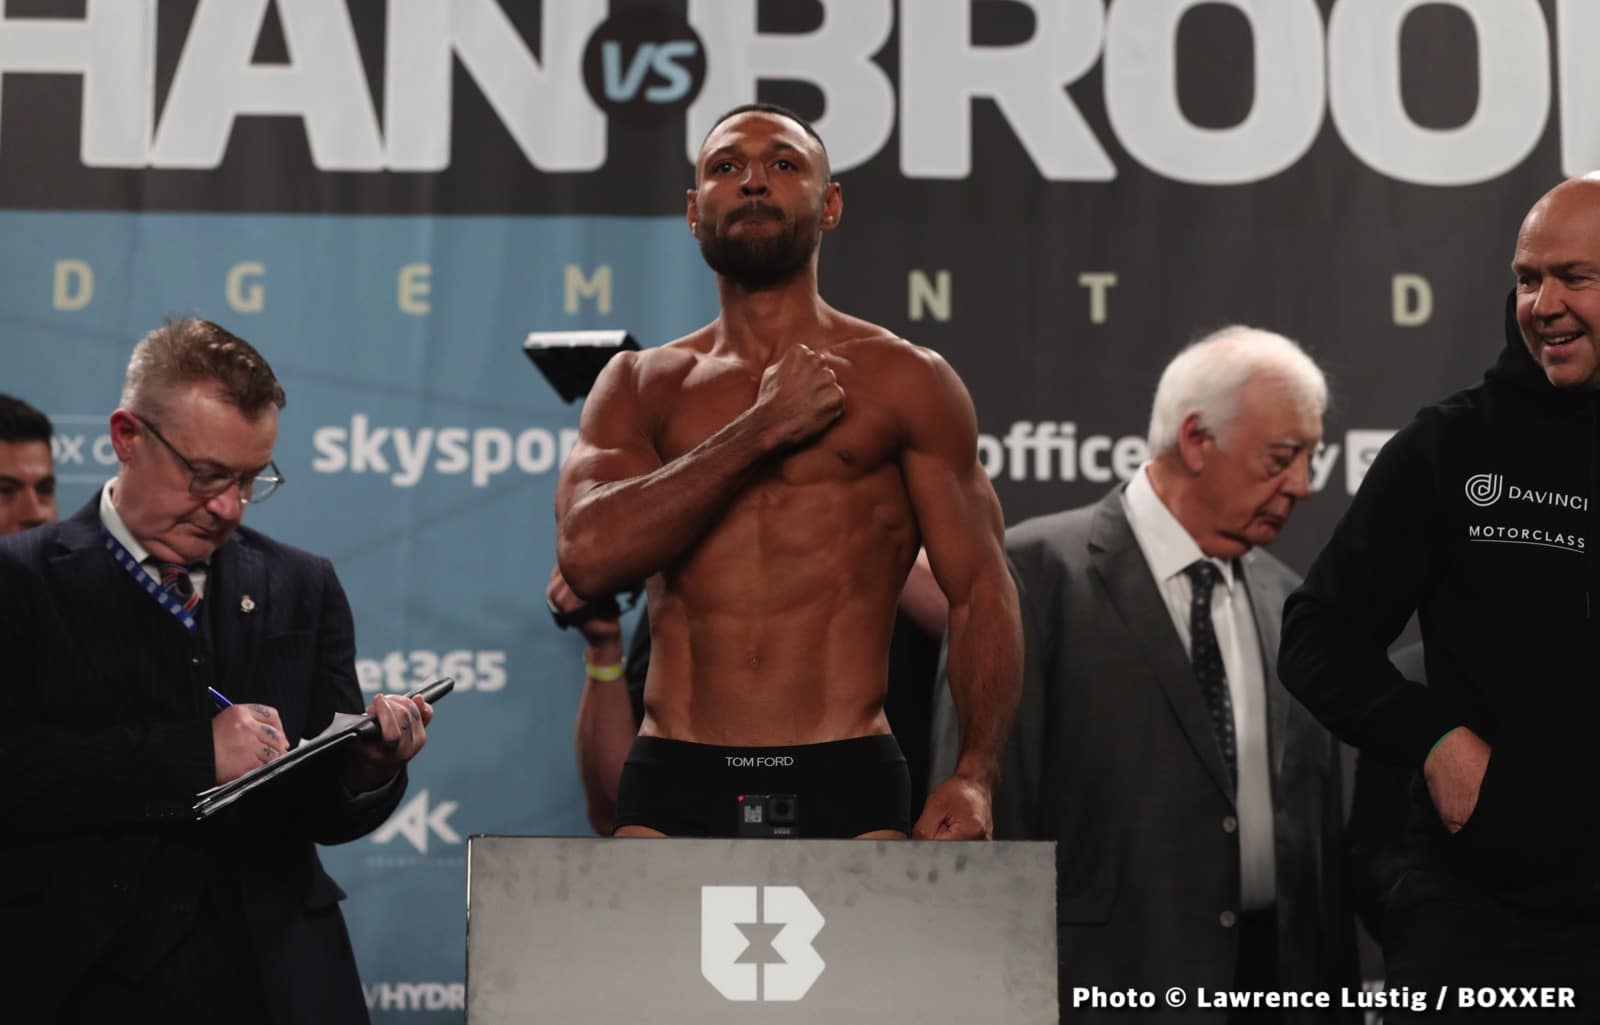 Image: Amir Khan: "Kell Brook is going to be shown who the better fighter is on Saturday"